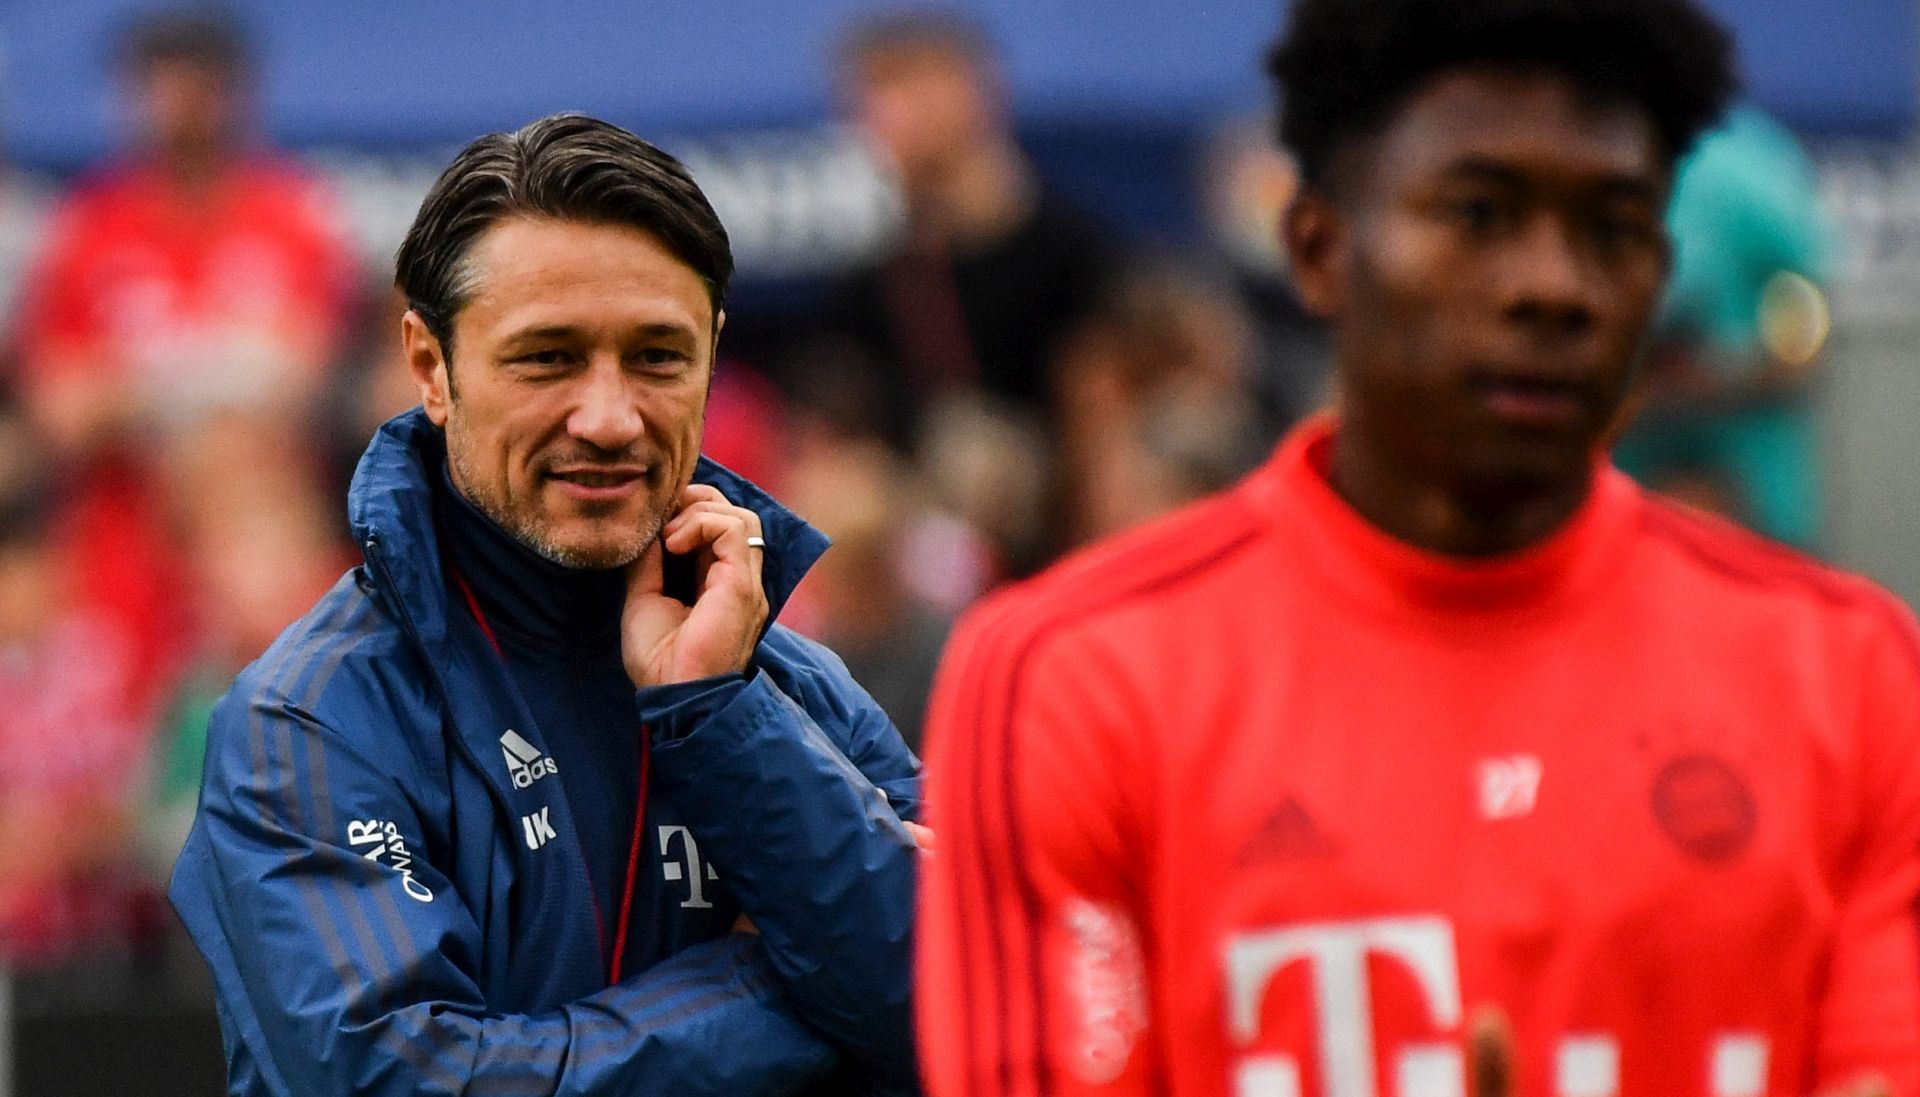 epa07765583 Bayern Munich's head coach Niko Kovac gestures during the FC Bayern Muenchen training camp in Rottach-Egern, Germany, 10 August 2019. The german first dvision soccer is preparing for the 2019/2020 season until 10 August.  EPA/PHILIPP GUELLAND